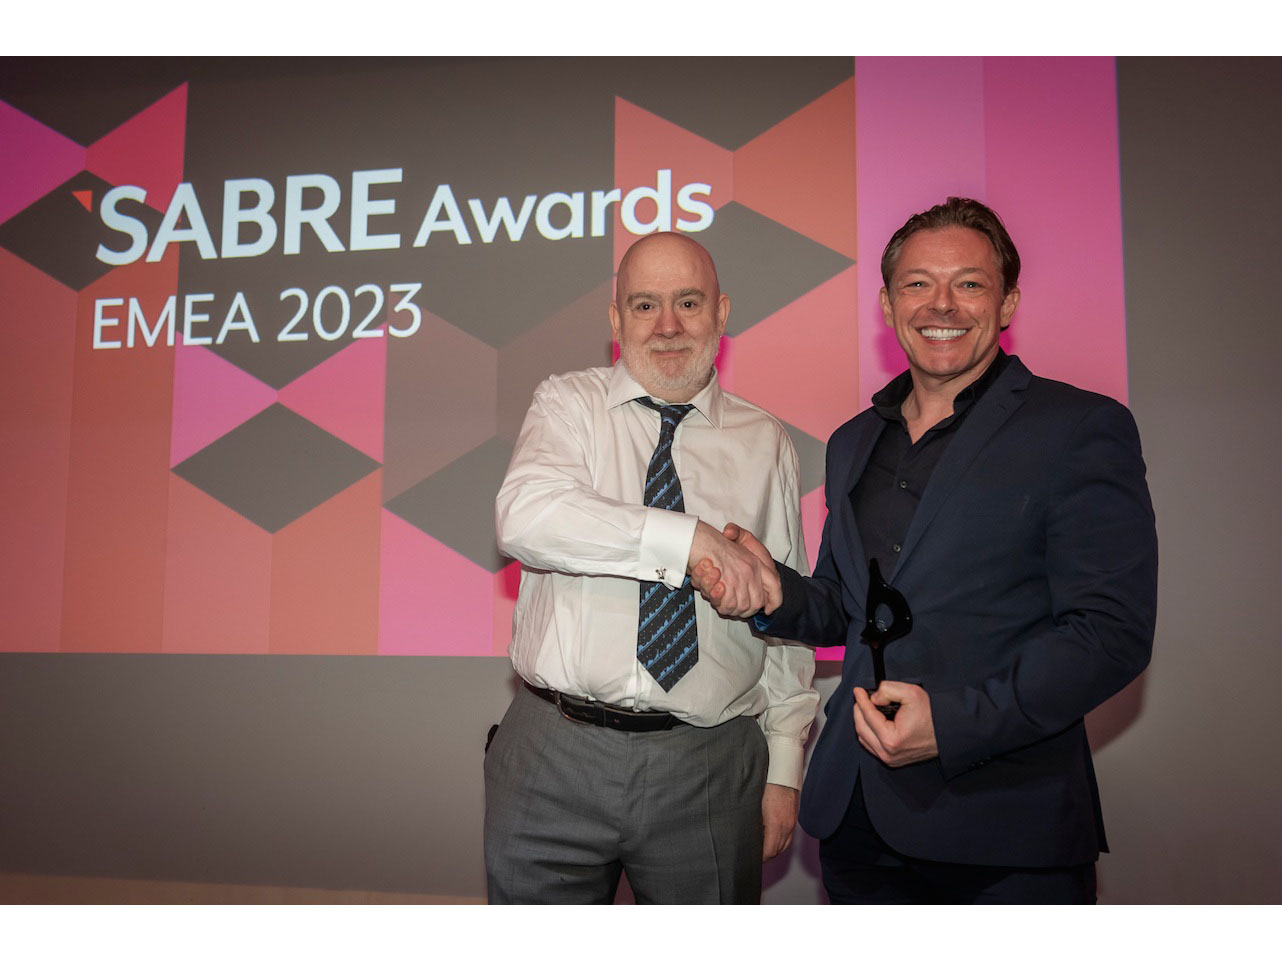 ASDA’A BCW named ‘Middle East Consultancy of the Year’  at 2023 EMEA SABRE Awards